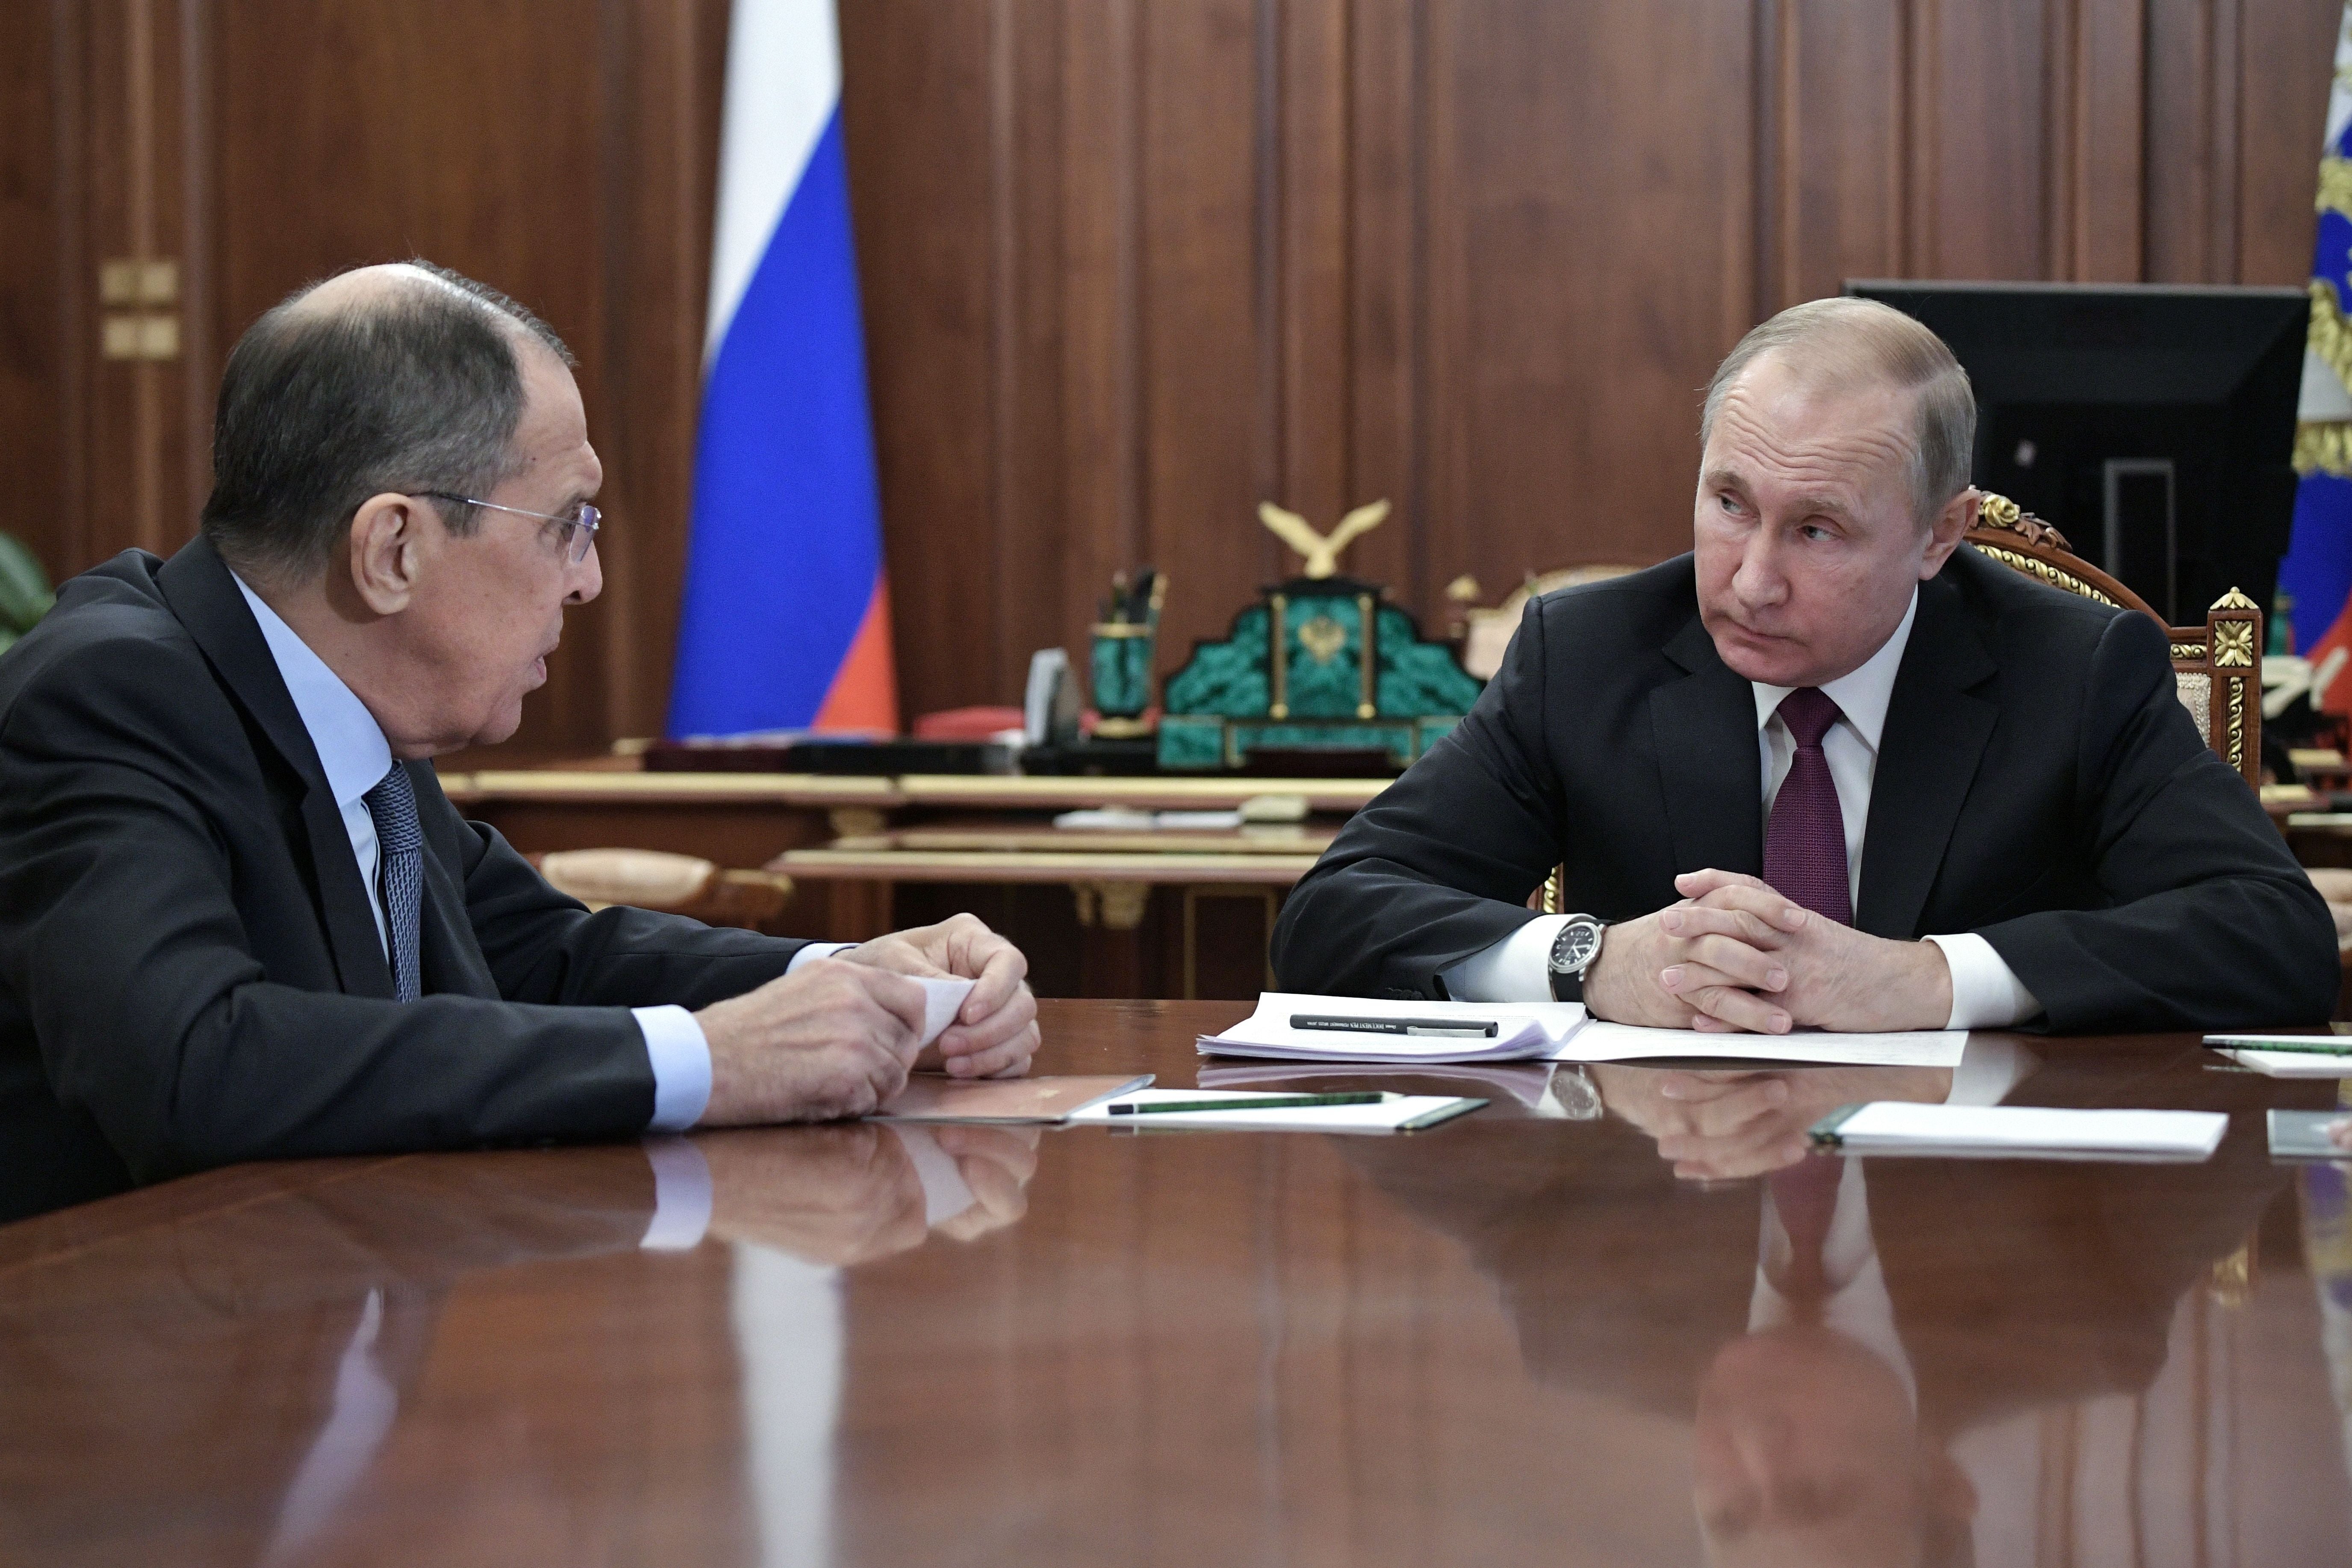 File photo: Russia’s President Vladimir Putin (R) attends a meeting with Russia’s Foreign Minister Sergei Lavrov (L) in Moscow, 2 February 2019